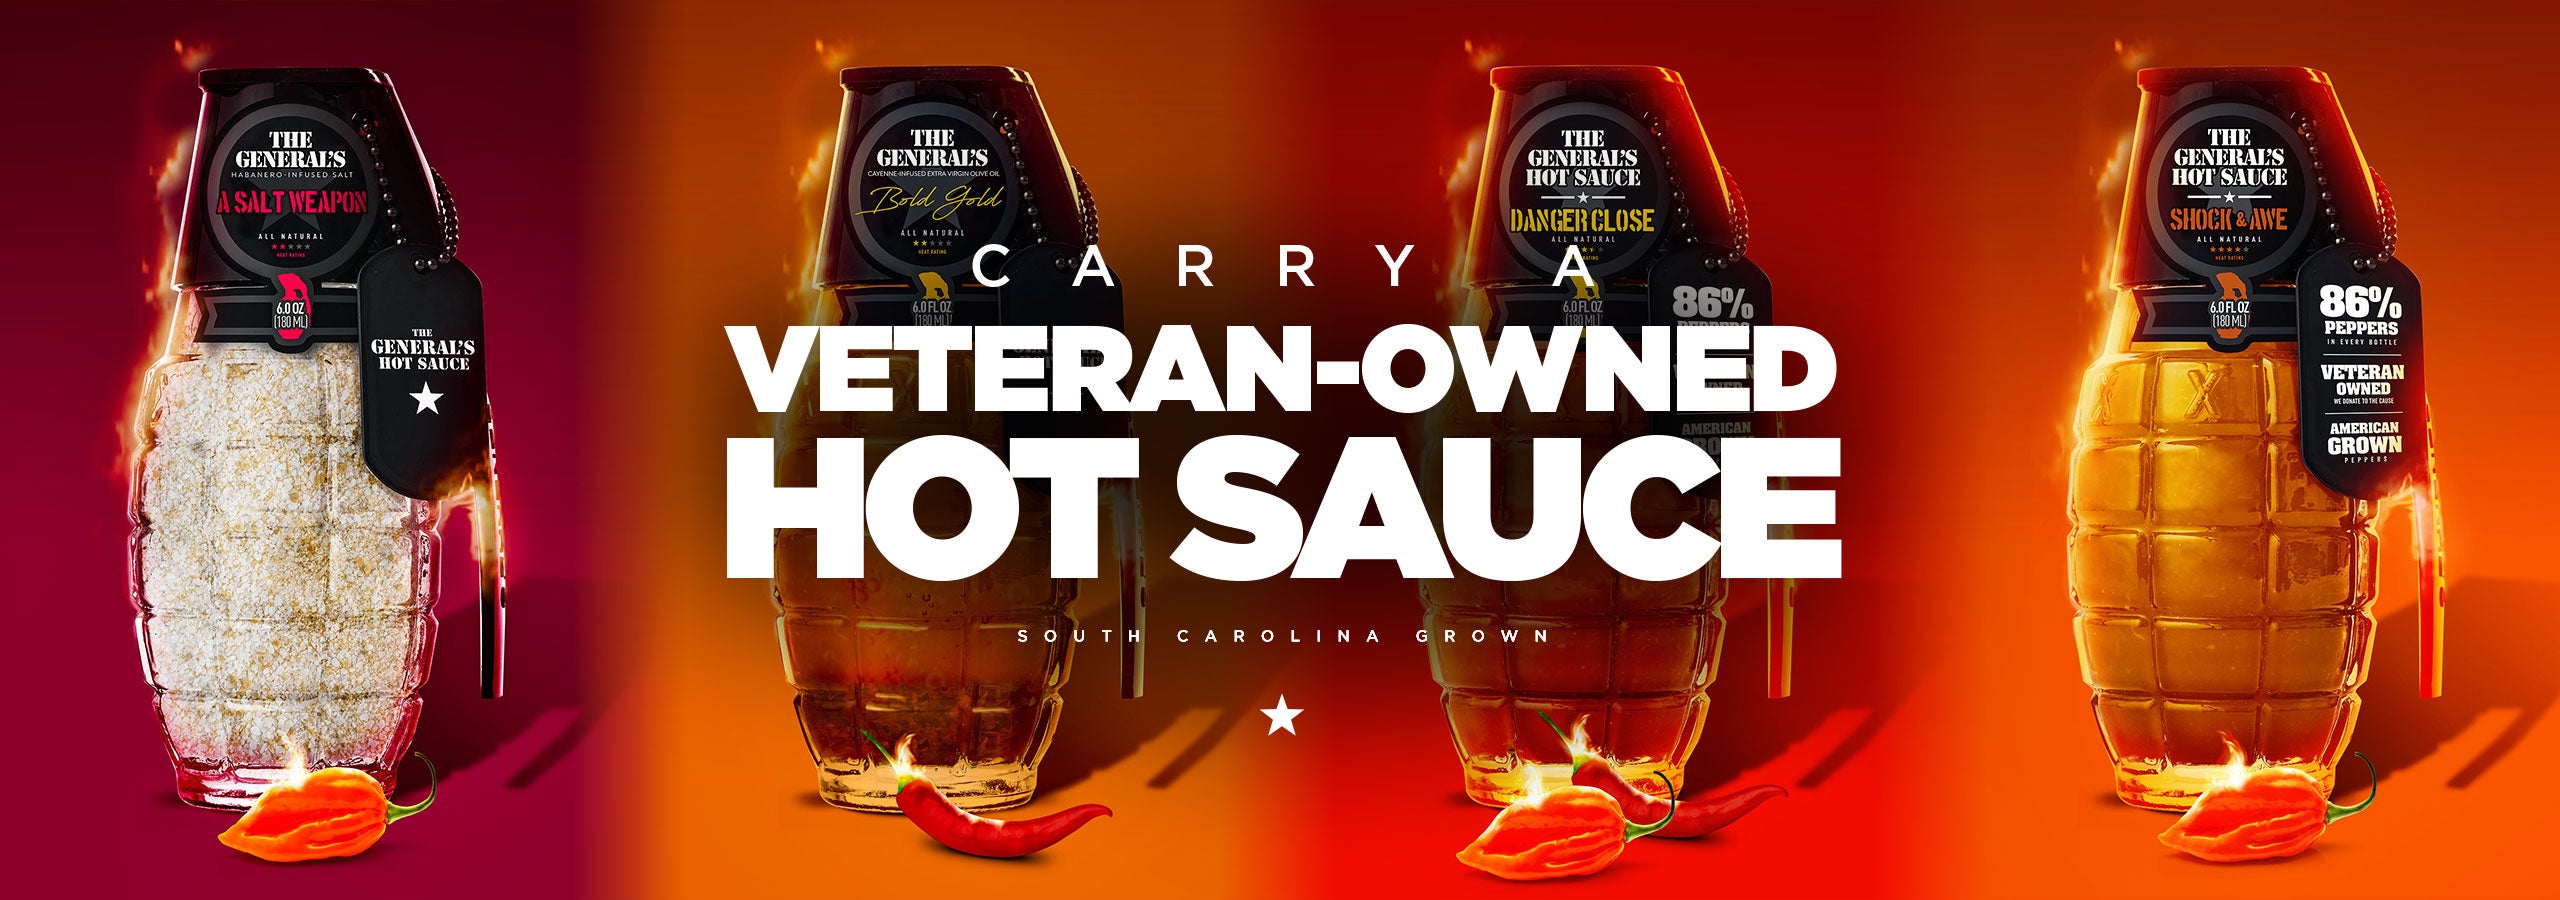 Carry a veteran-owned hot sauce